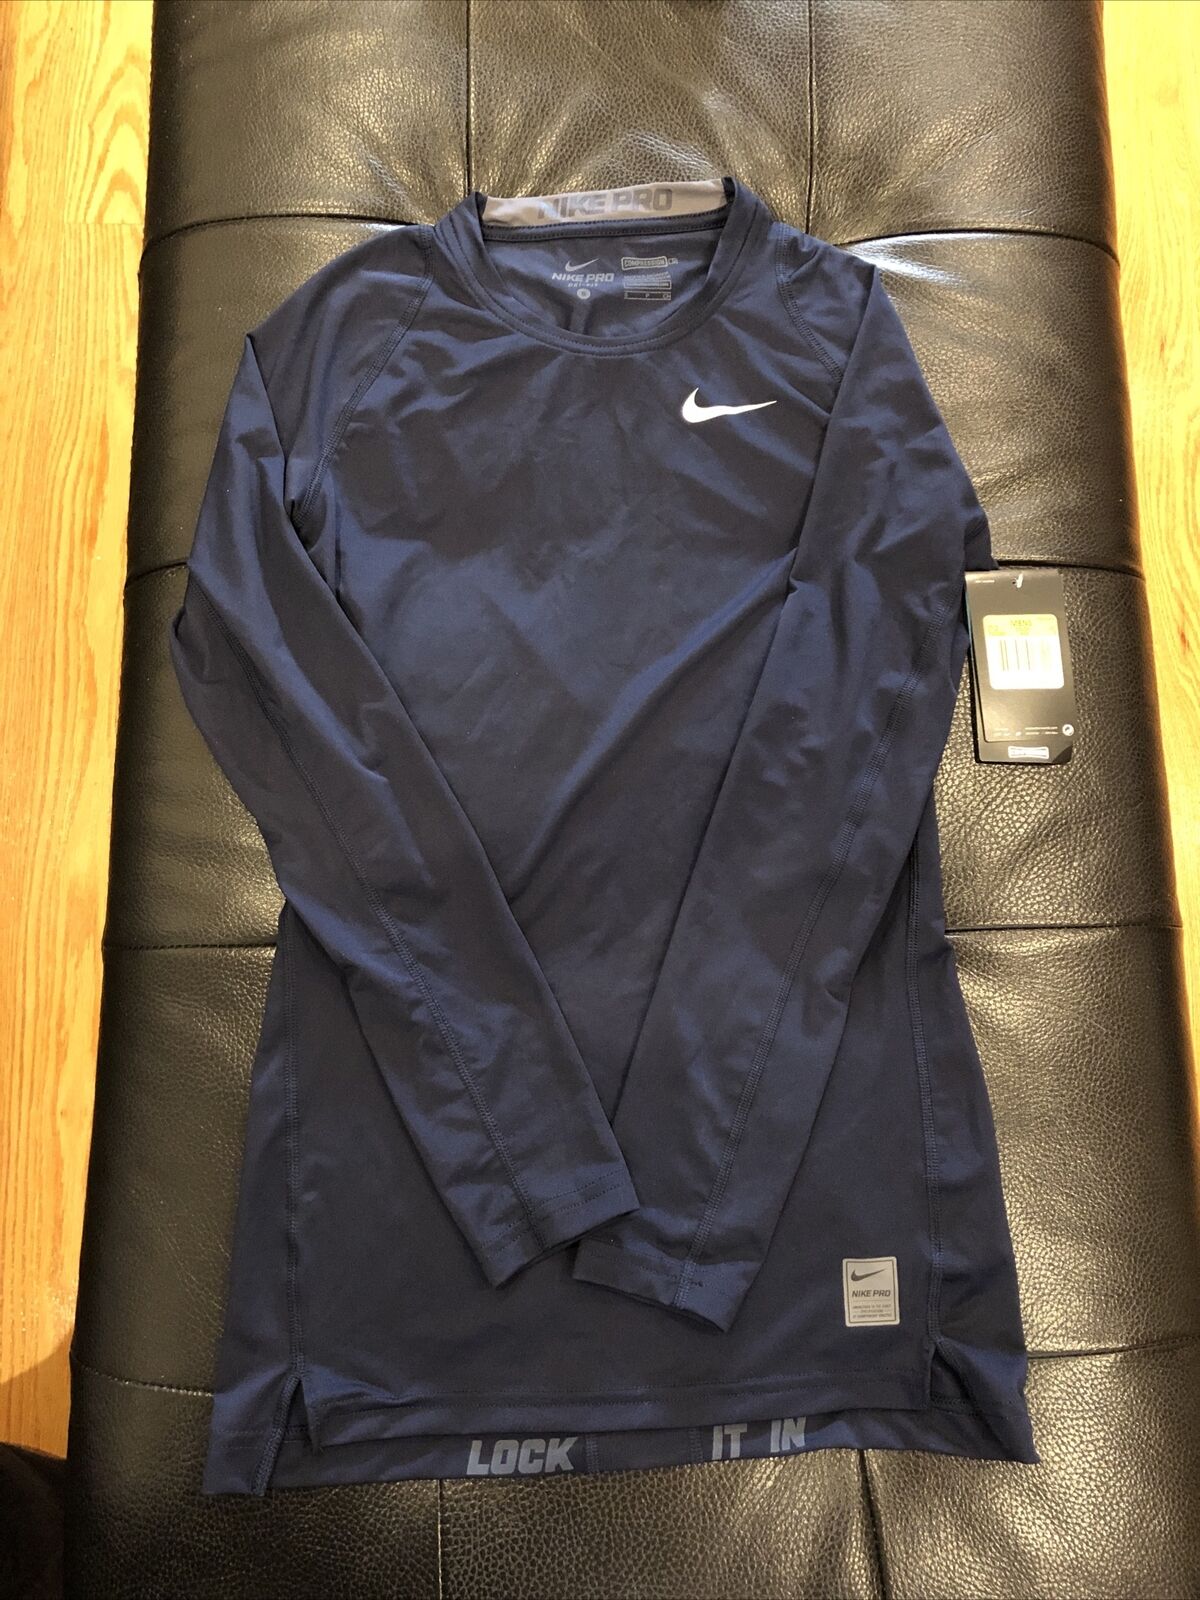 Nike Men's Pro Cool Compression Top, New With Tags, (703088-451)